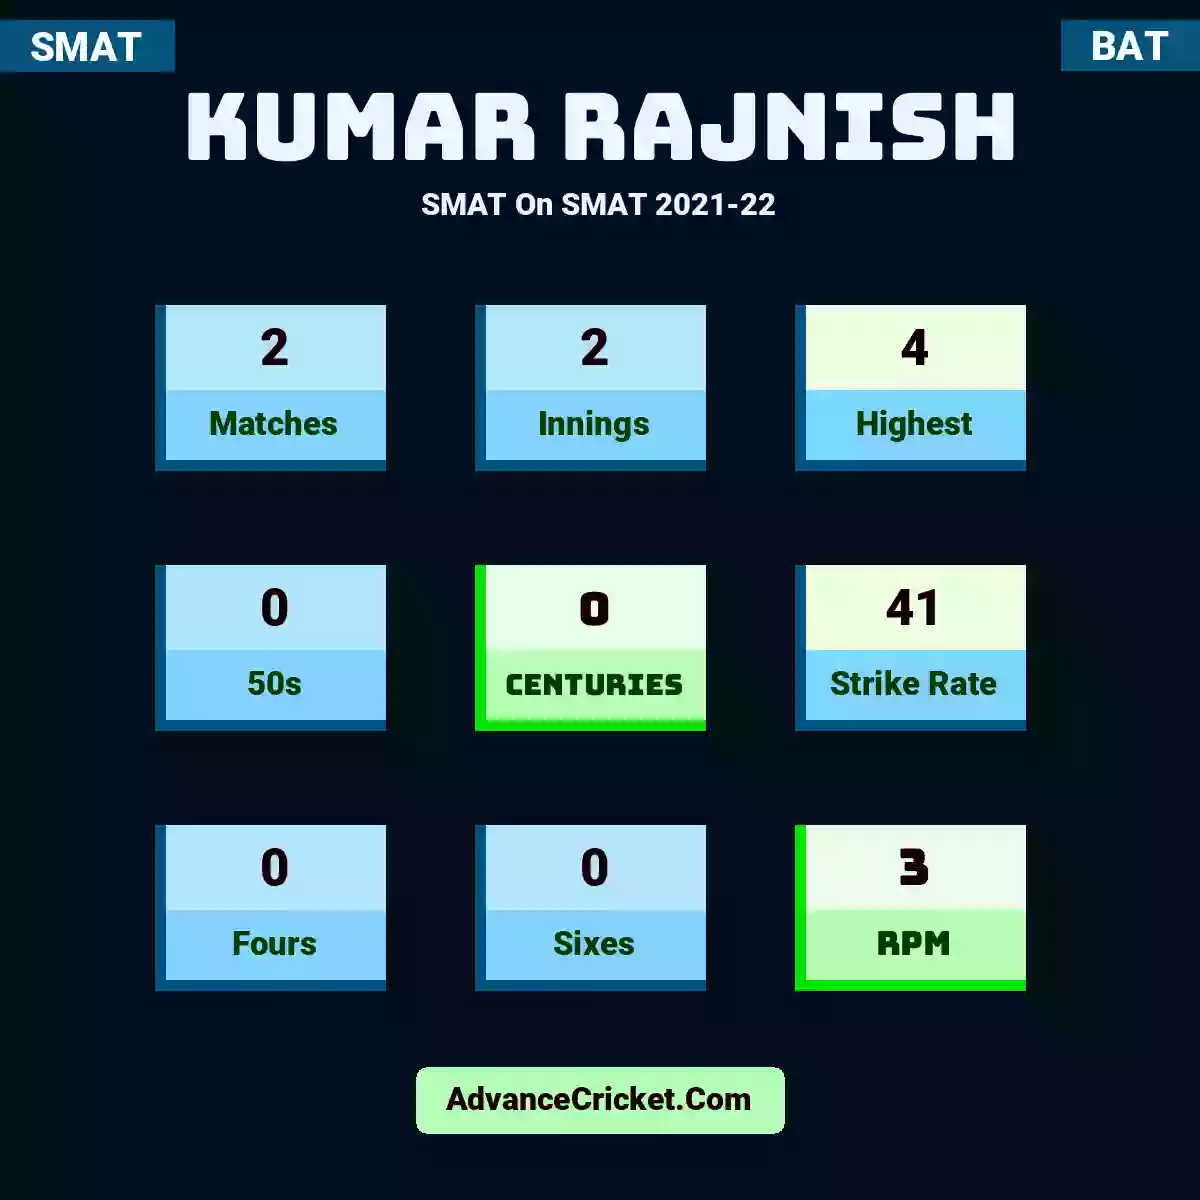 Kumar Rajnish SMAT  On SMAT 2021-22, Kumar Rajnish played 2 matches, scored 4 runs as highest, 0 half-centuries, and 0 centuries, with a strike rate of 41. K.Rajnish hit 0 fours and 0 sixes, with an RPM of 3.